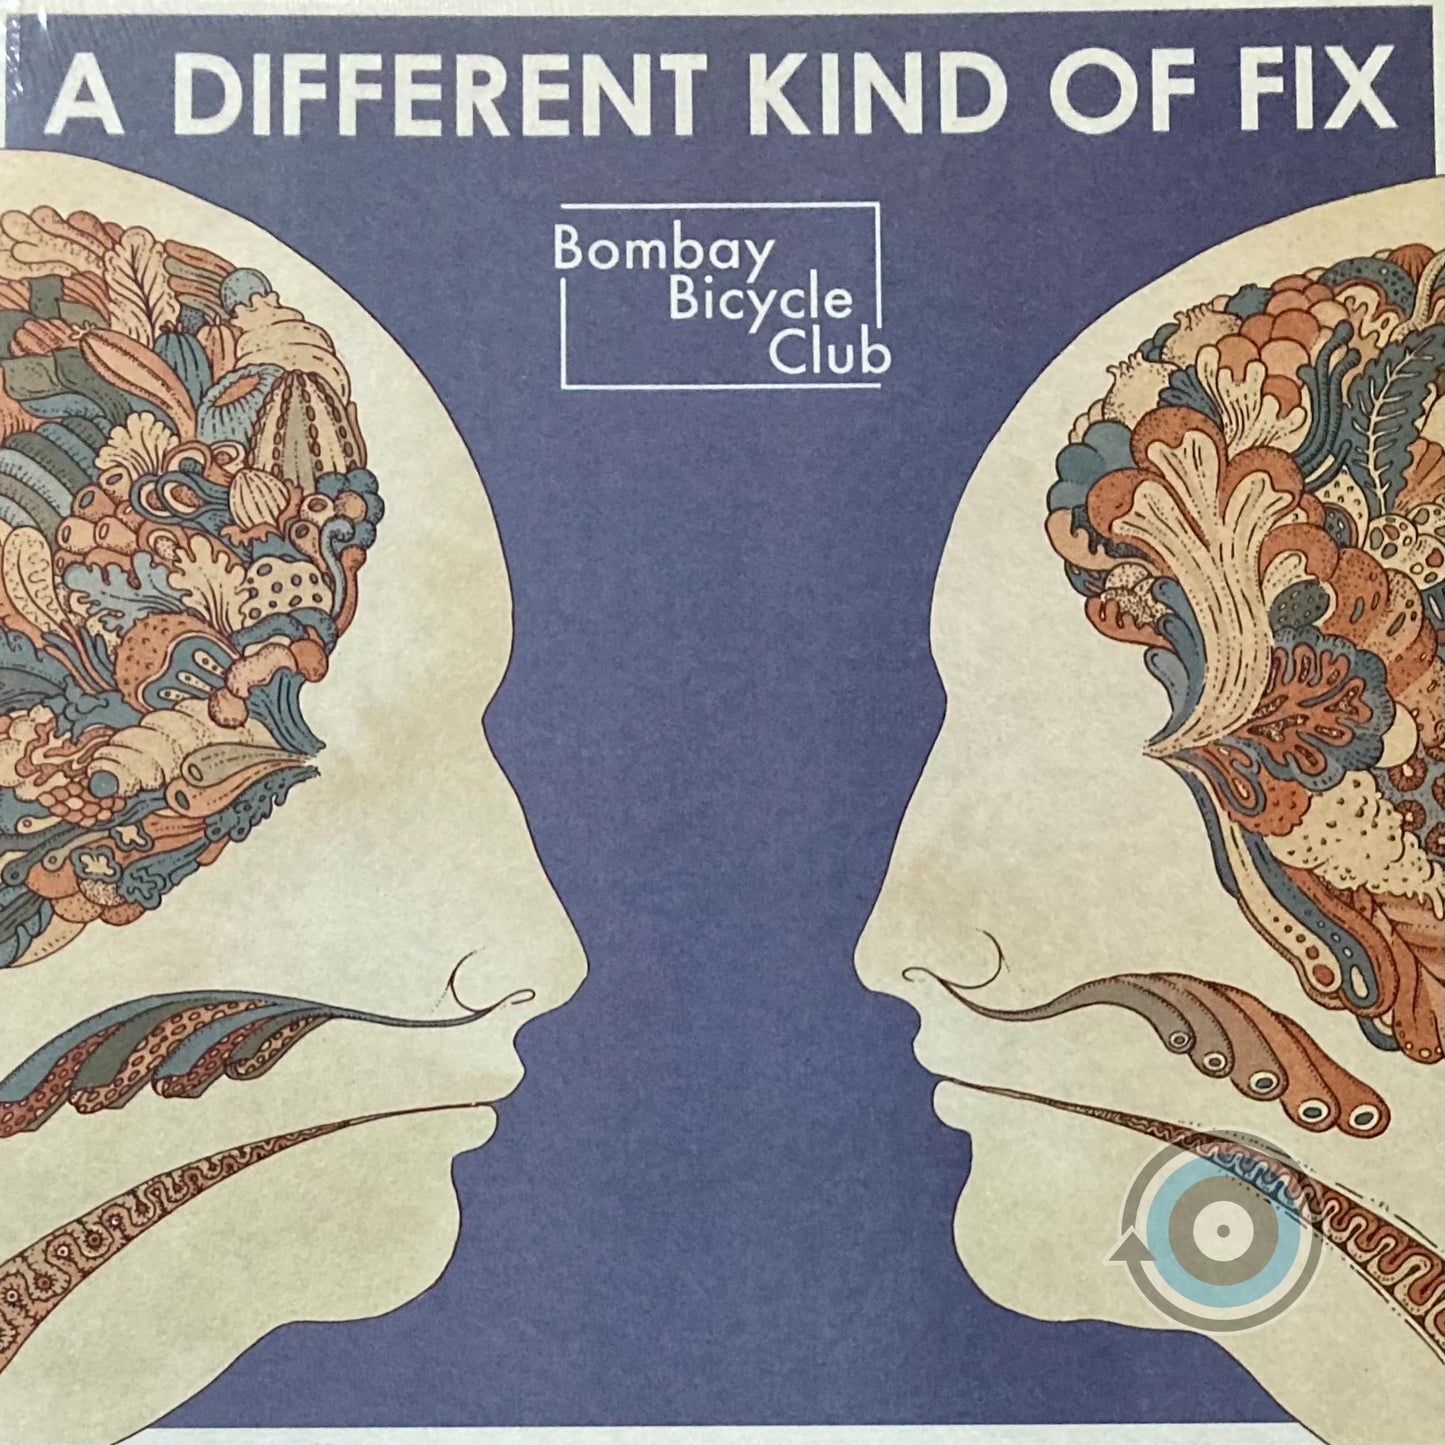 Bombay Bicycle Club - A Different Kind Of Fix LP (Sealed)